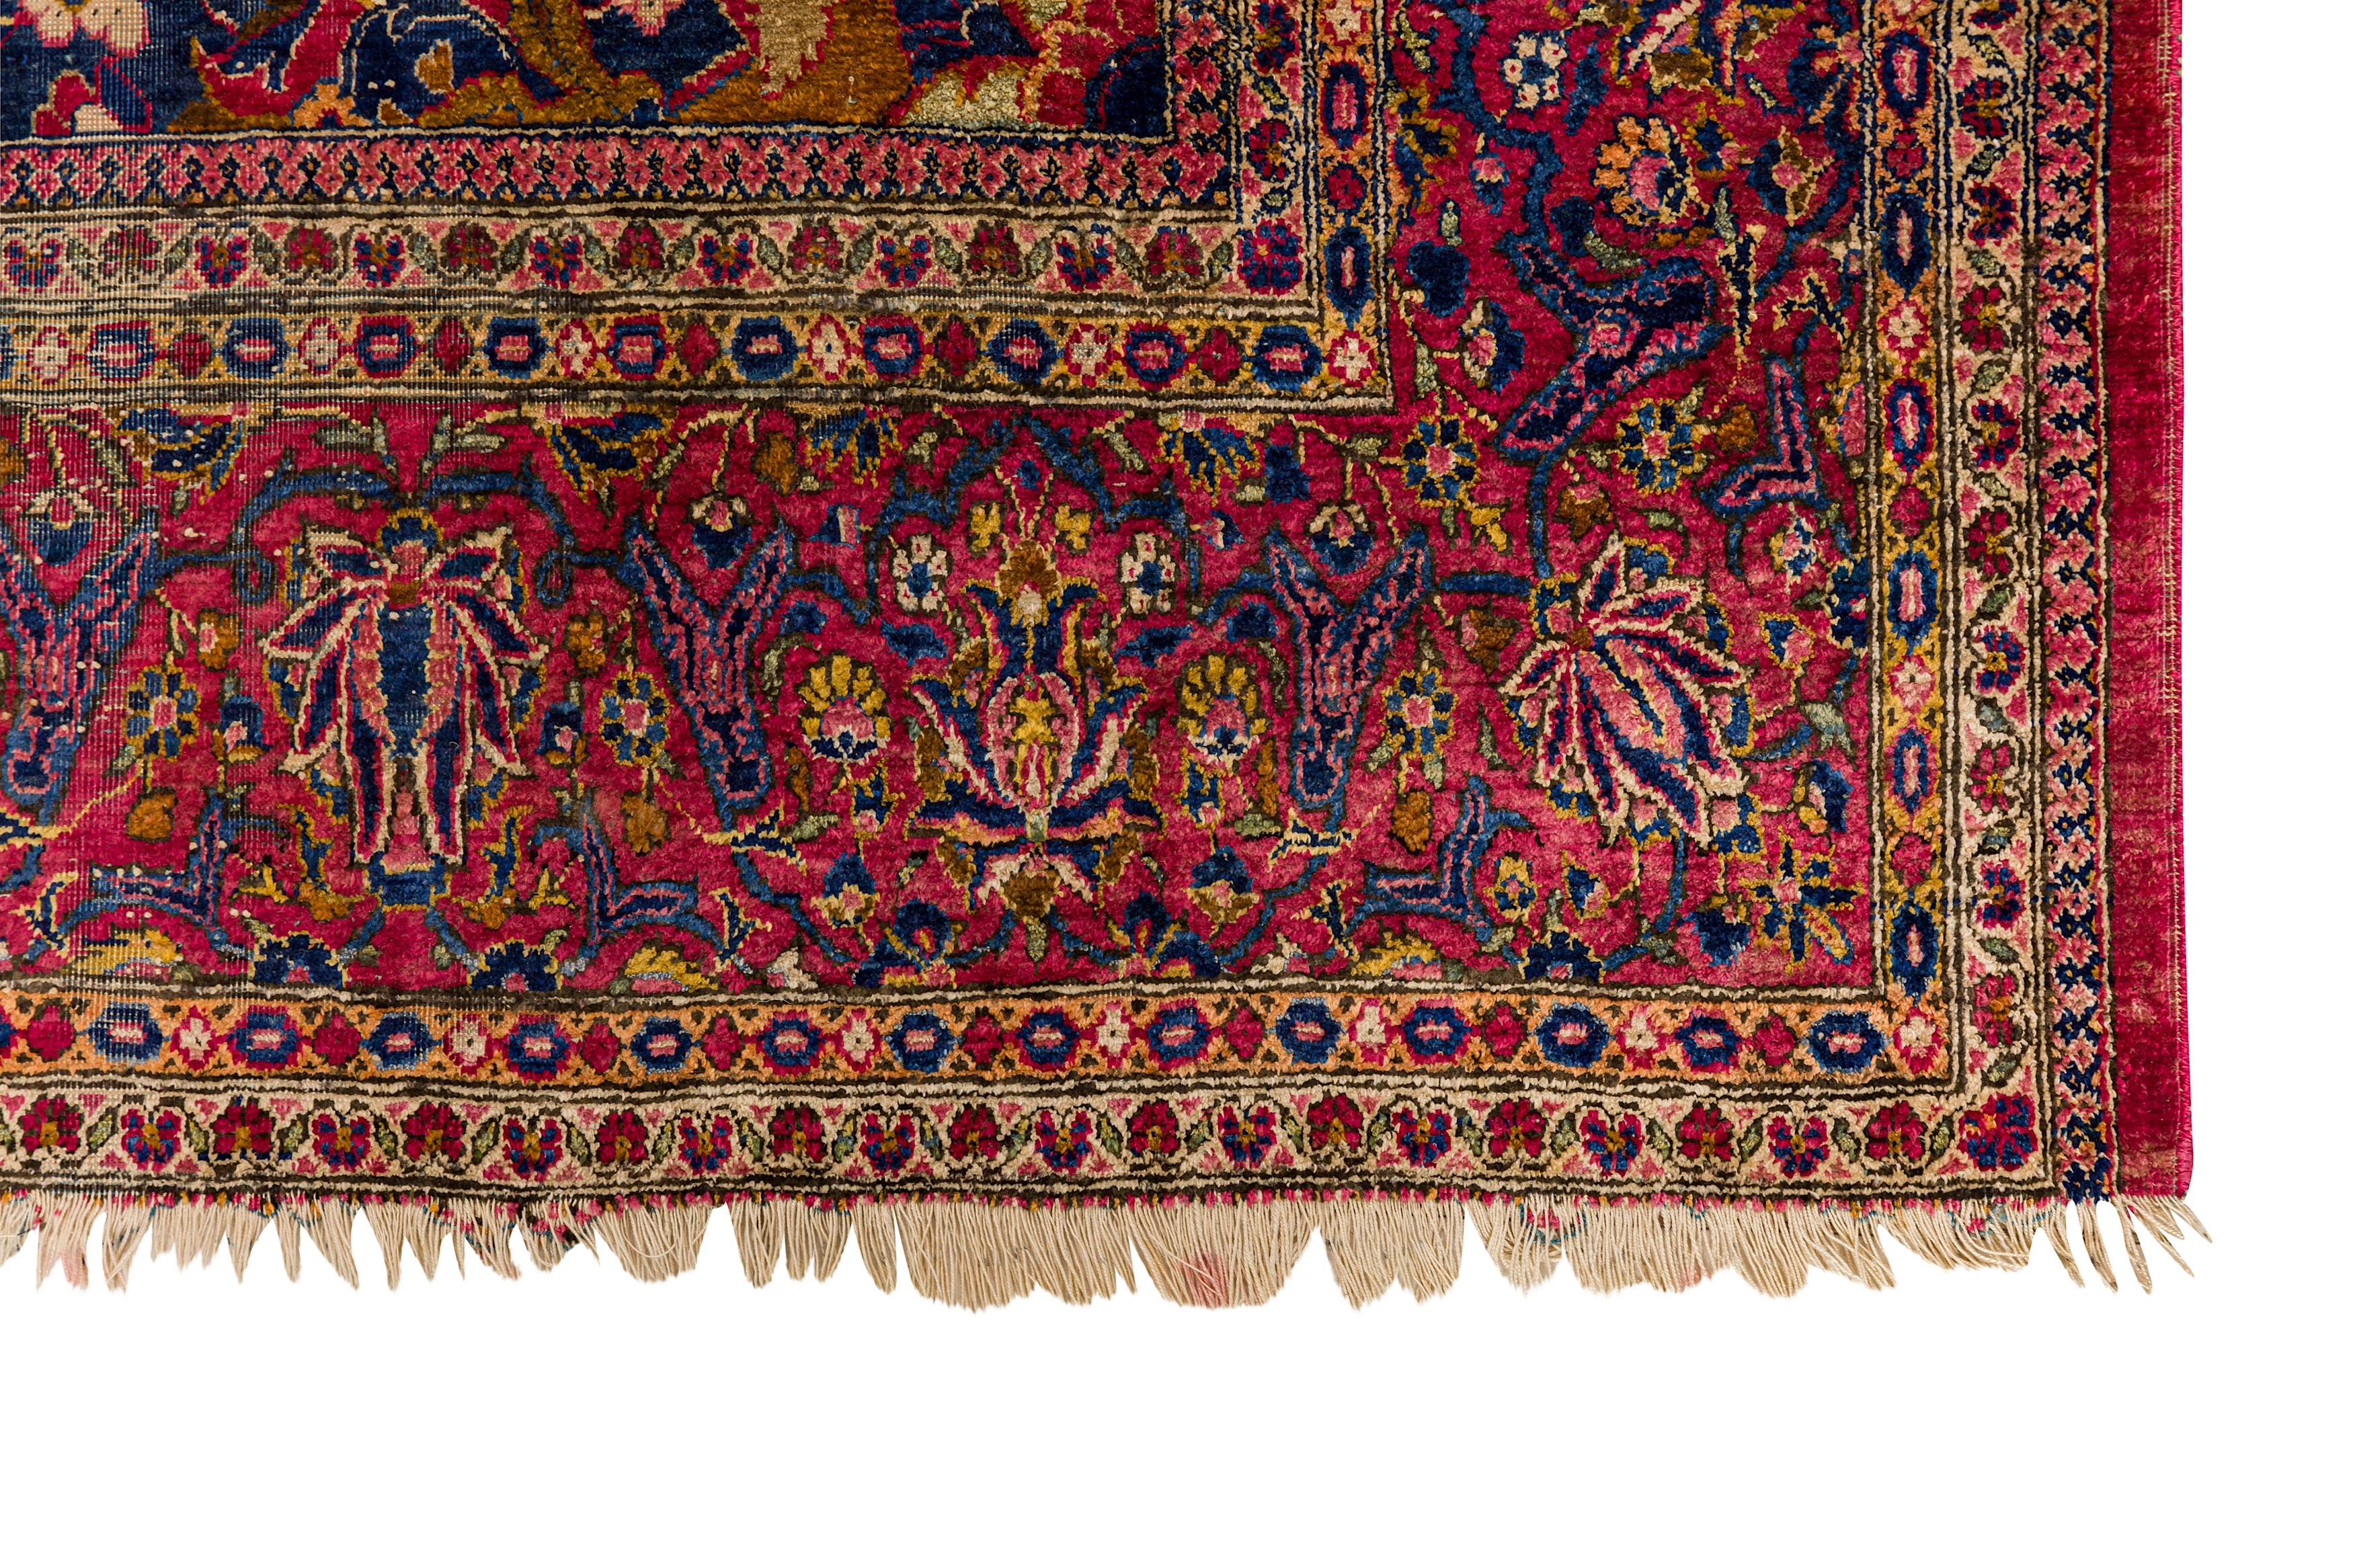 A VERY FINE SILK KASHAN RUG, CENTRAL PERSIA - Image 7 of 8